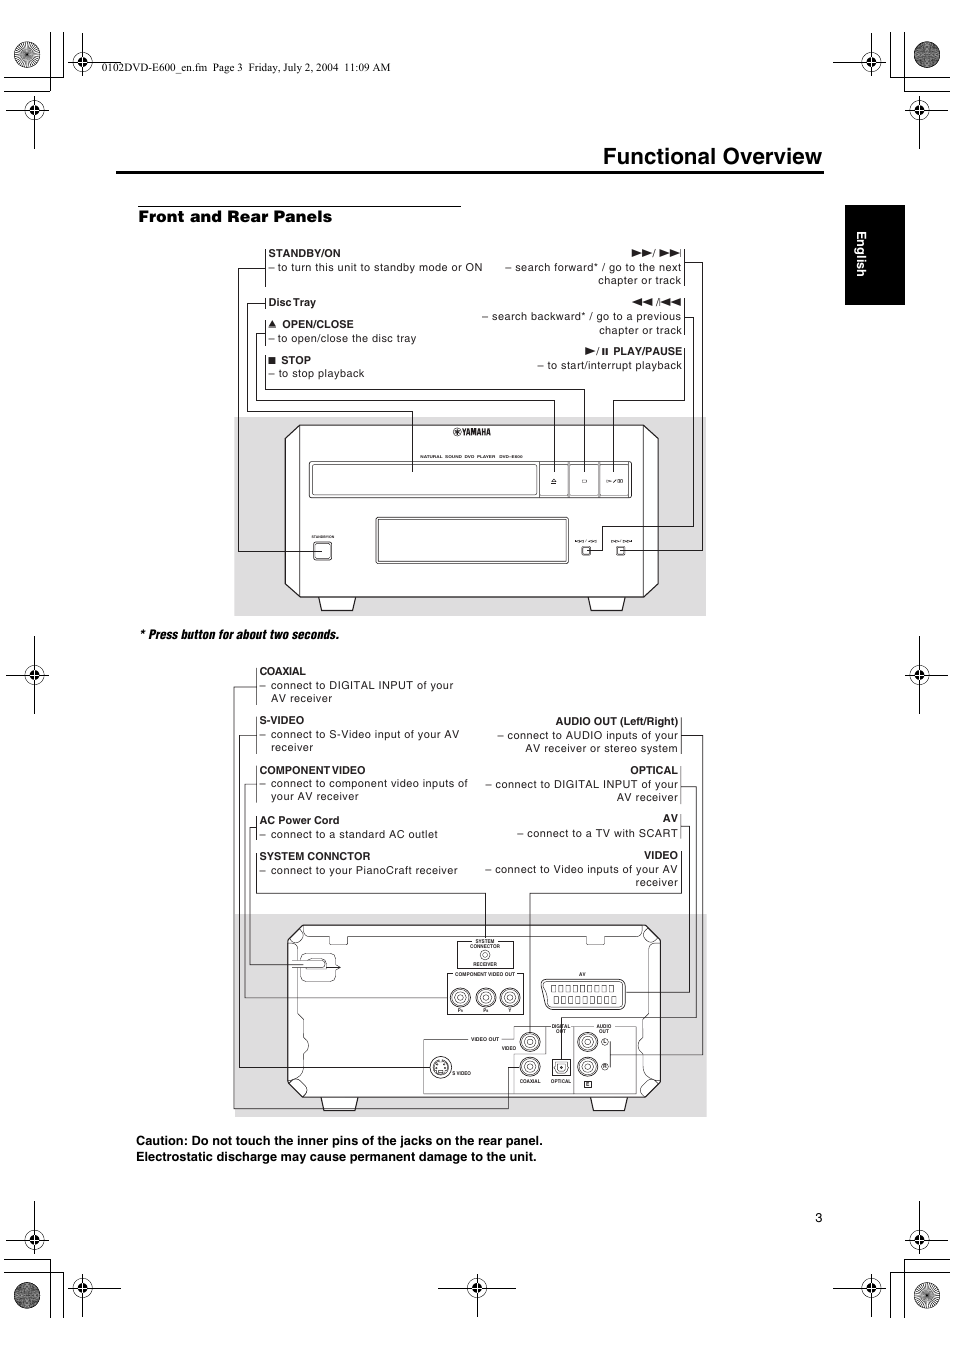 Front and rear panels, Functional overview, 3e n glish | Yamaha PIANO CRAFT DVD-E600 User Manual | Page 7 / 30